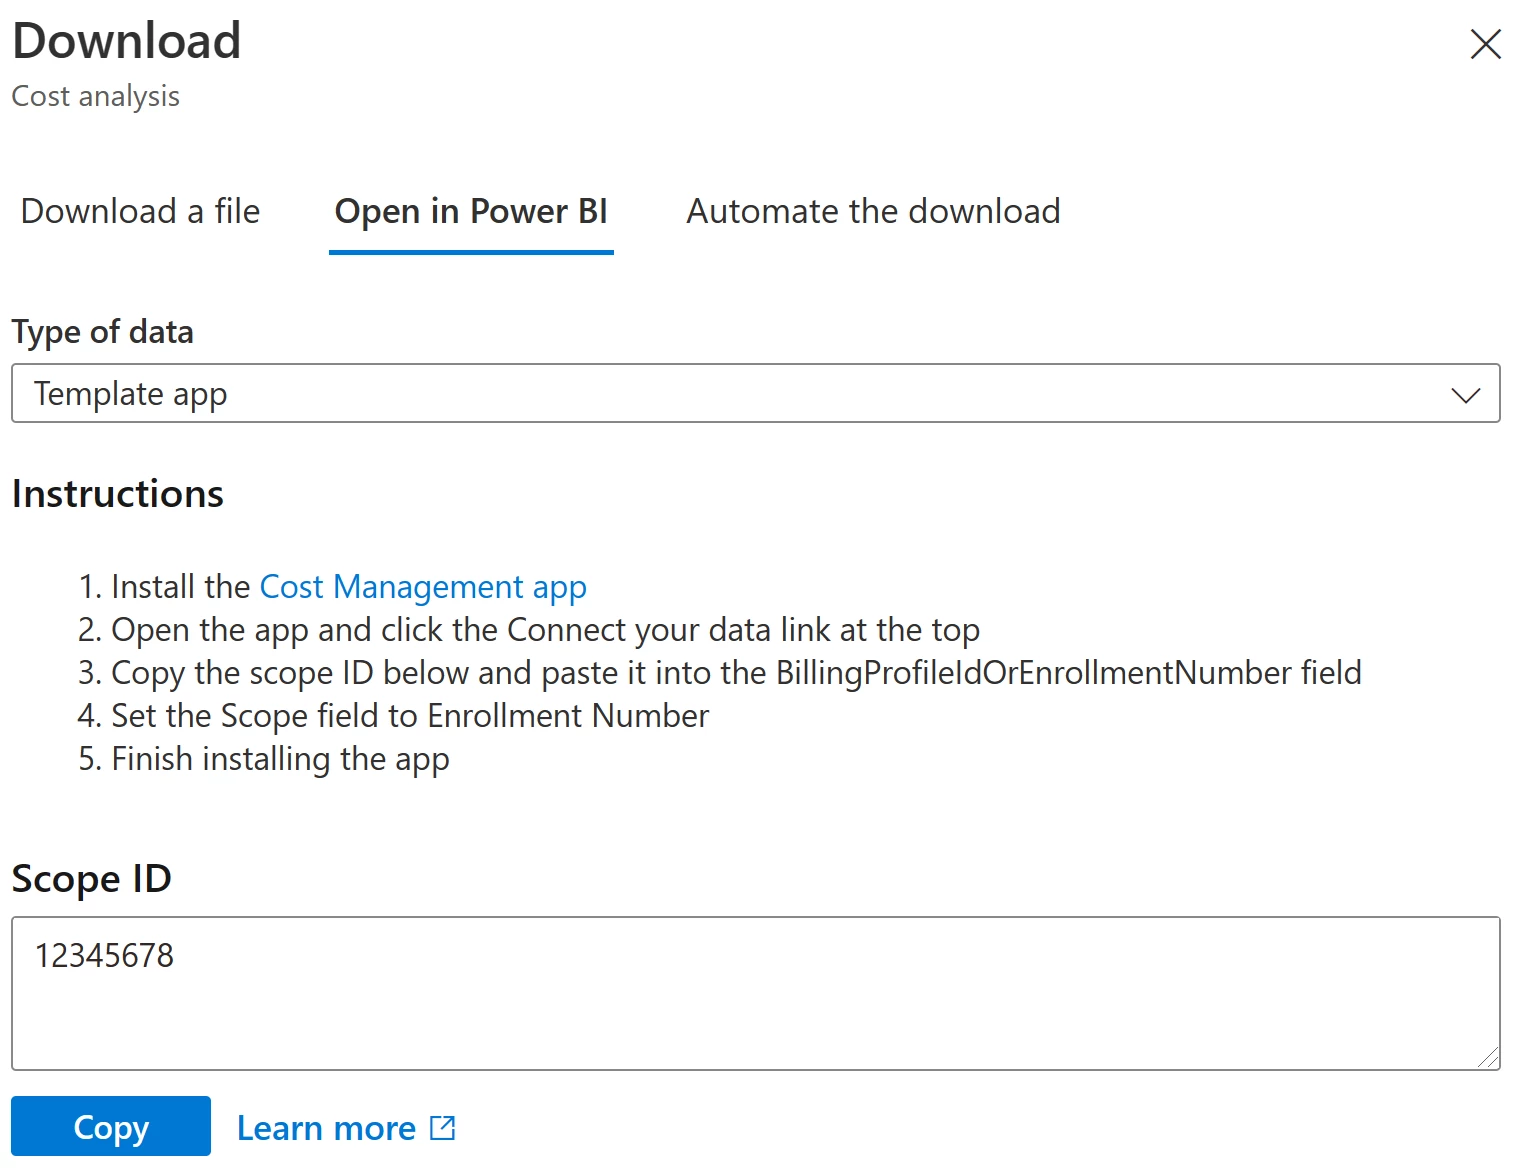 Open in Power BI option available in the Download pane from the cost analysis preview